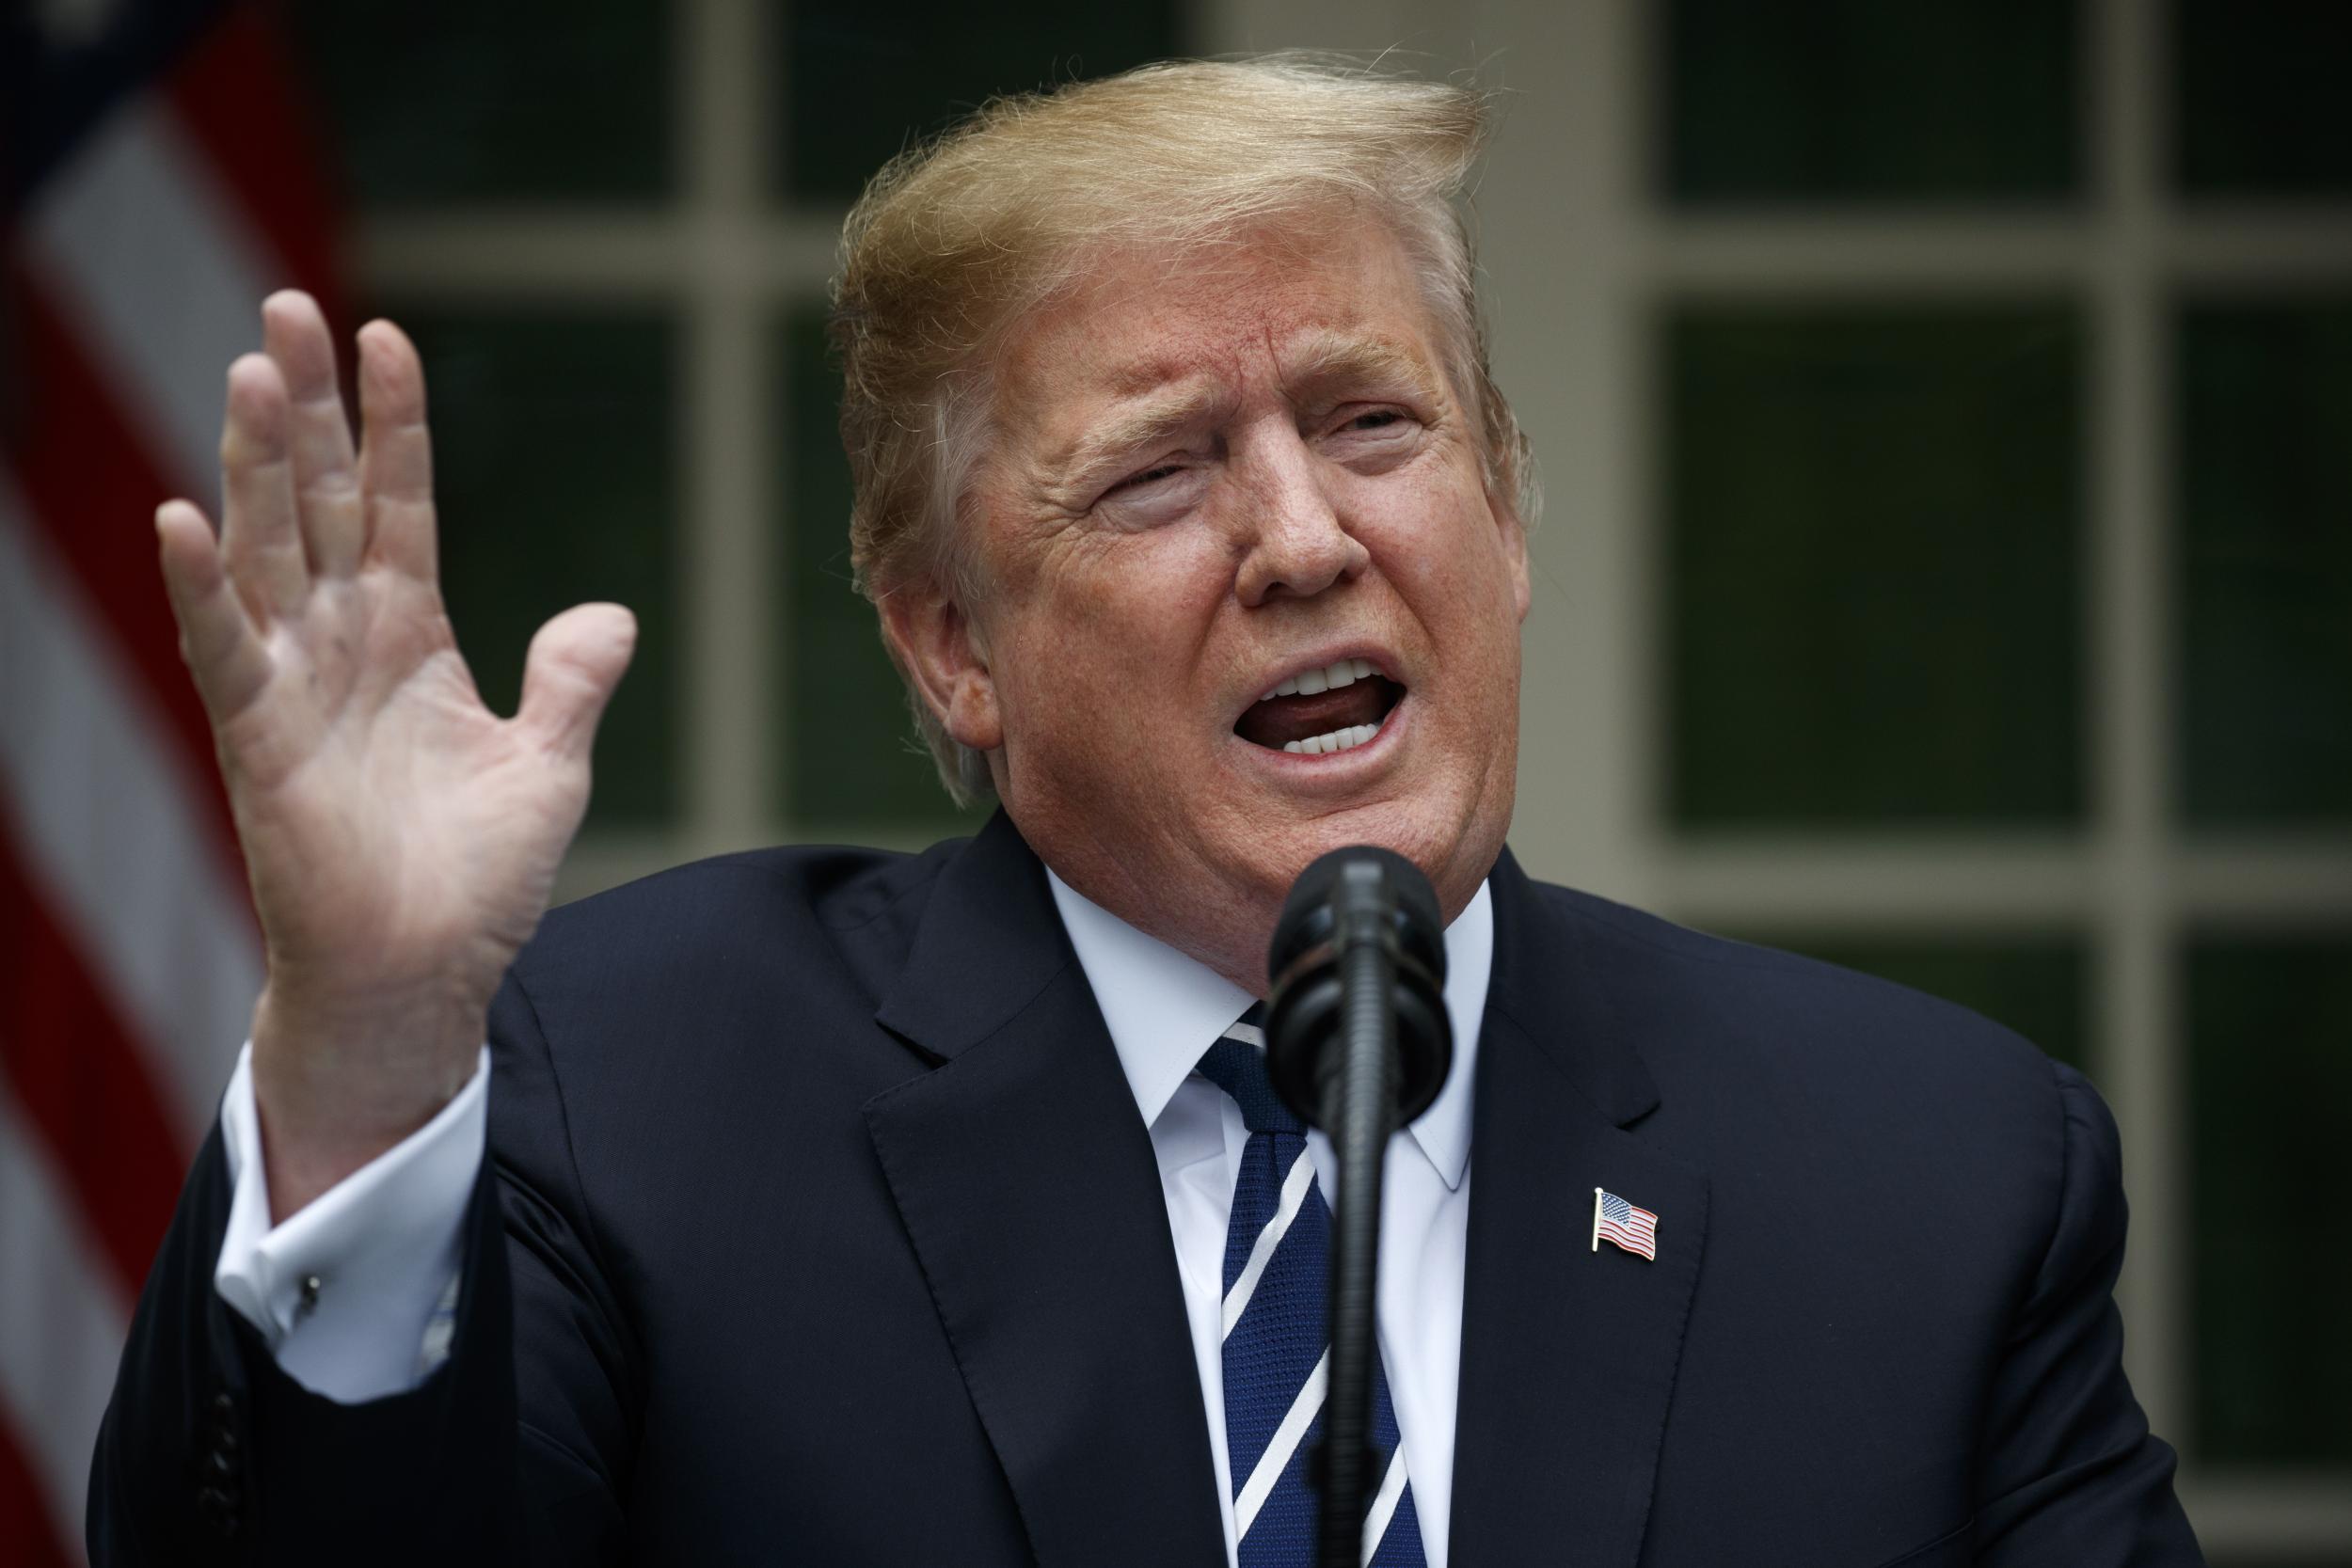 Trump news: President &apos;crying out&apos; for impeachment as he insists he is &apos;stable genius&apos; in White House rant